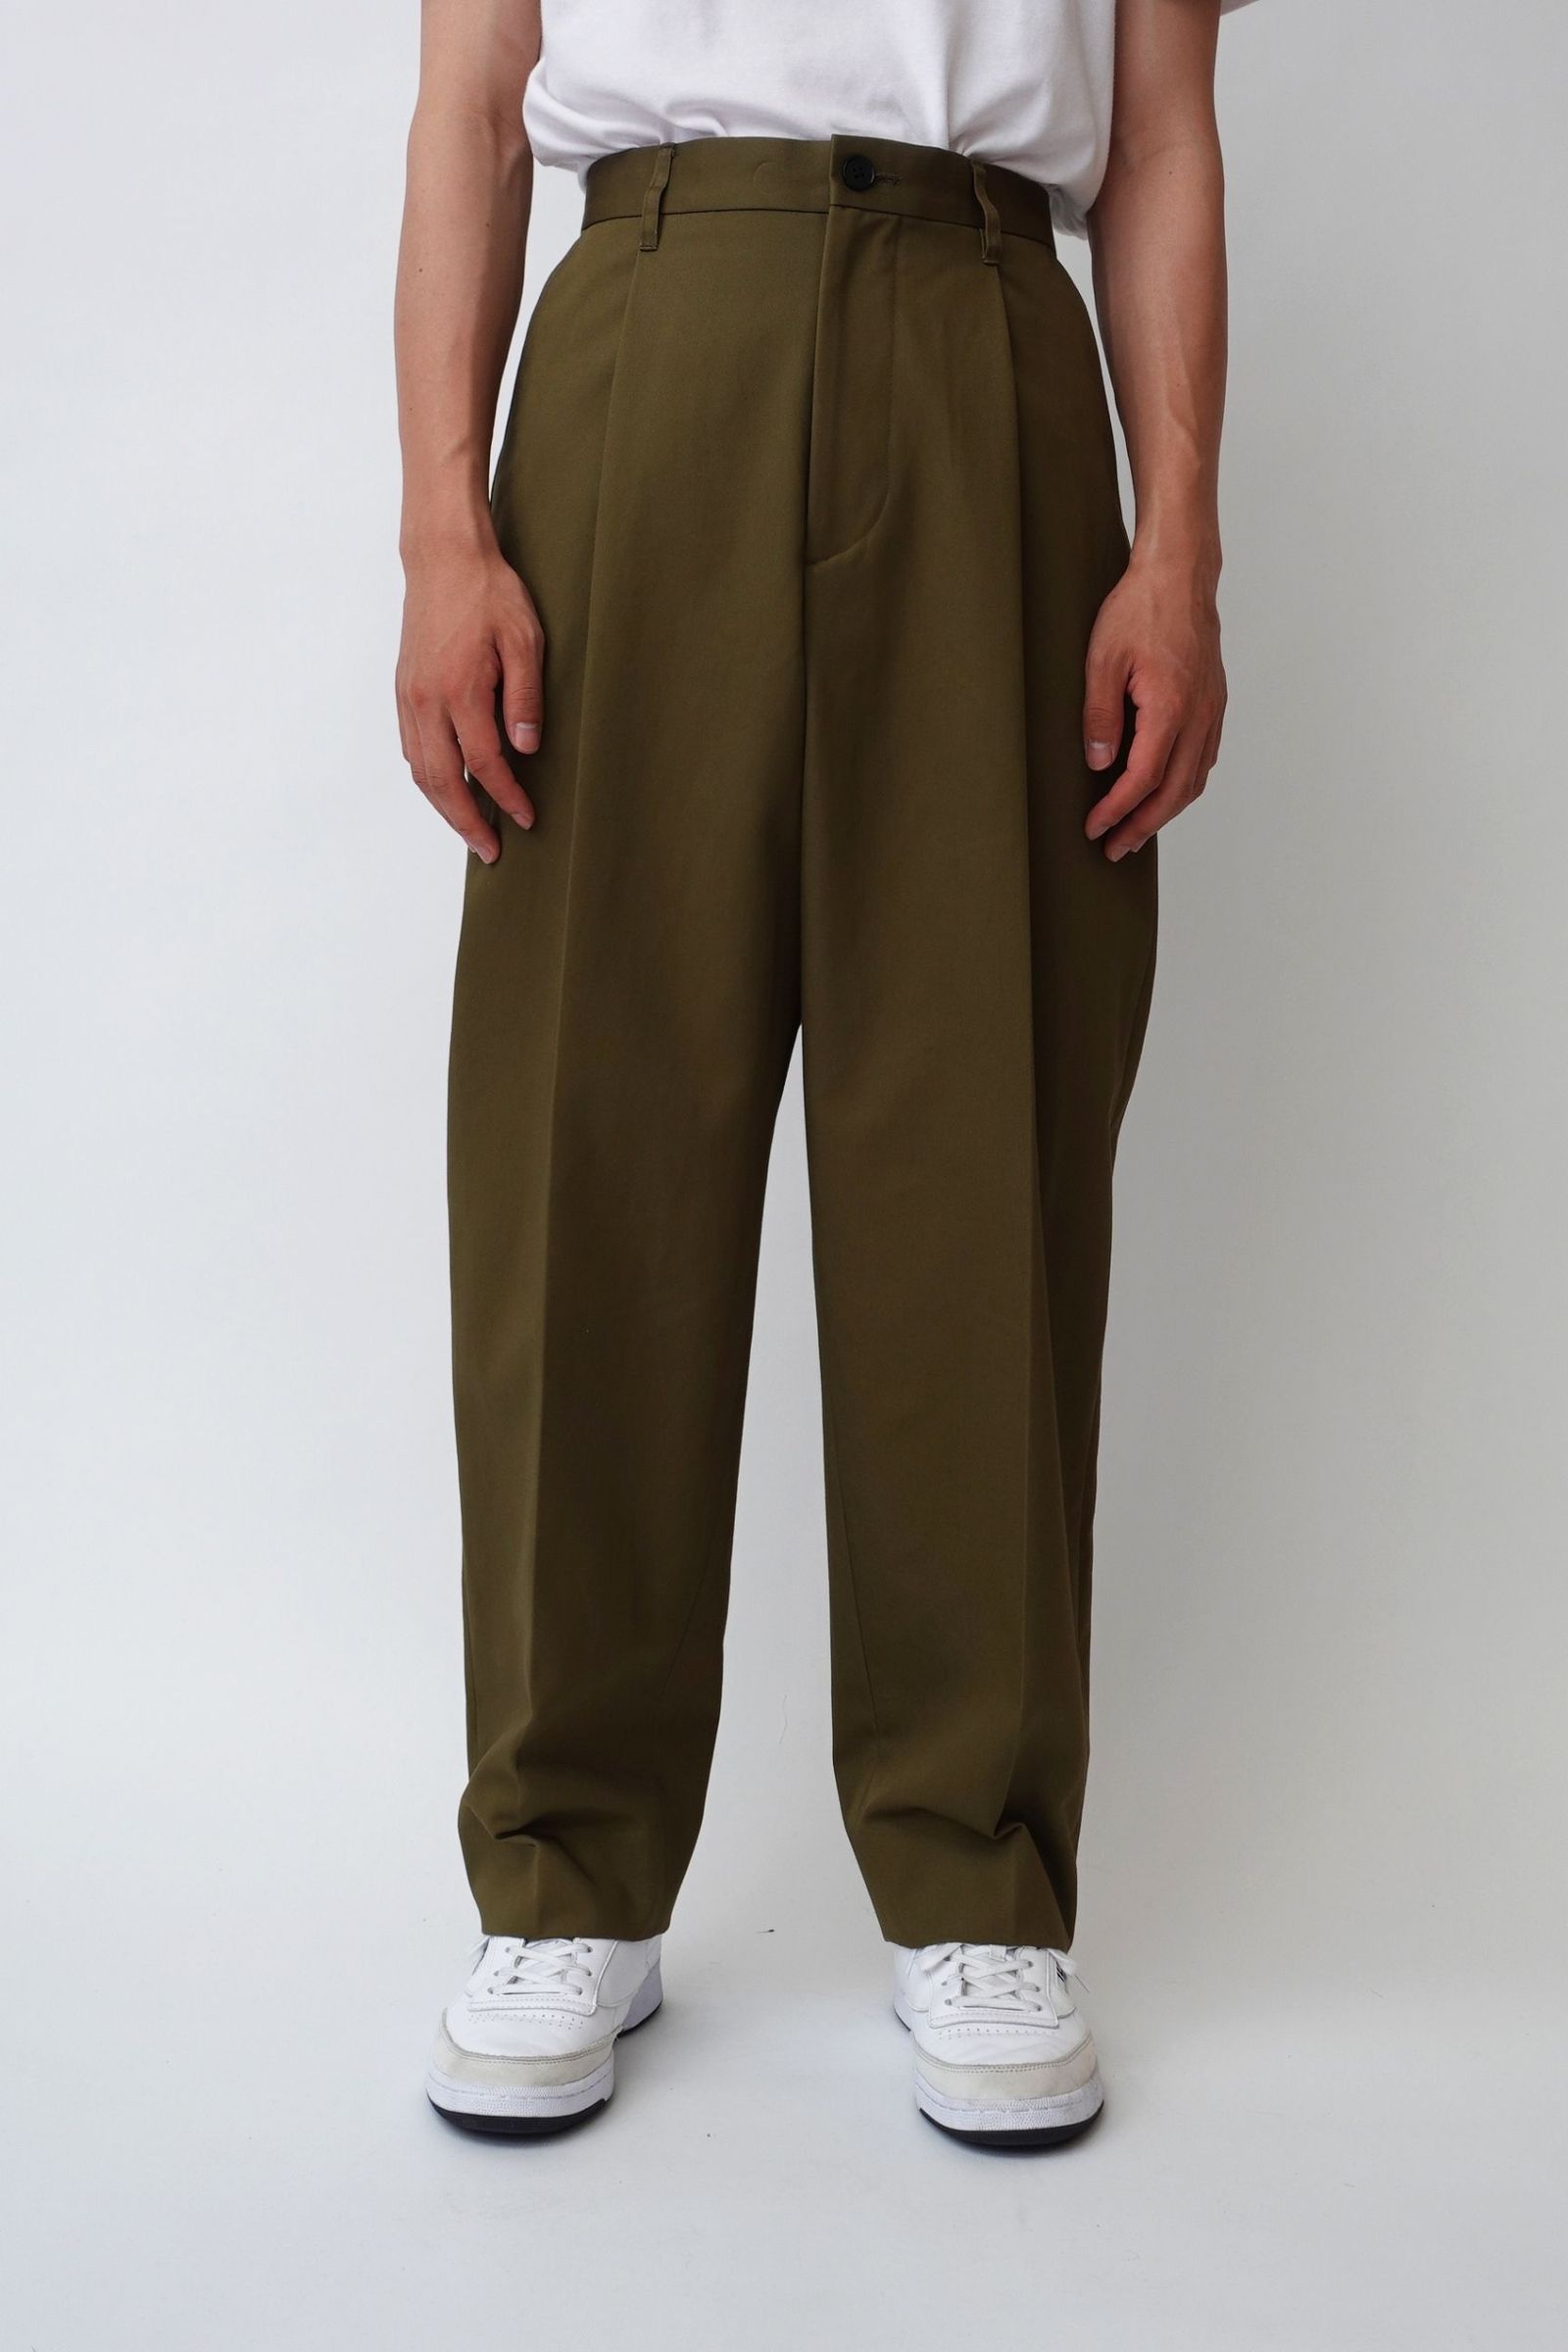 UNIVERSAL PRODUCTS - COTTON 1TUCK TROUSERS/コットン1タック